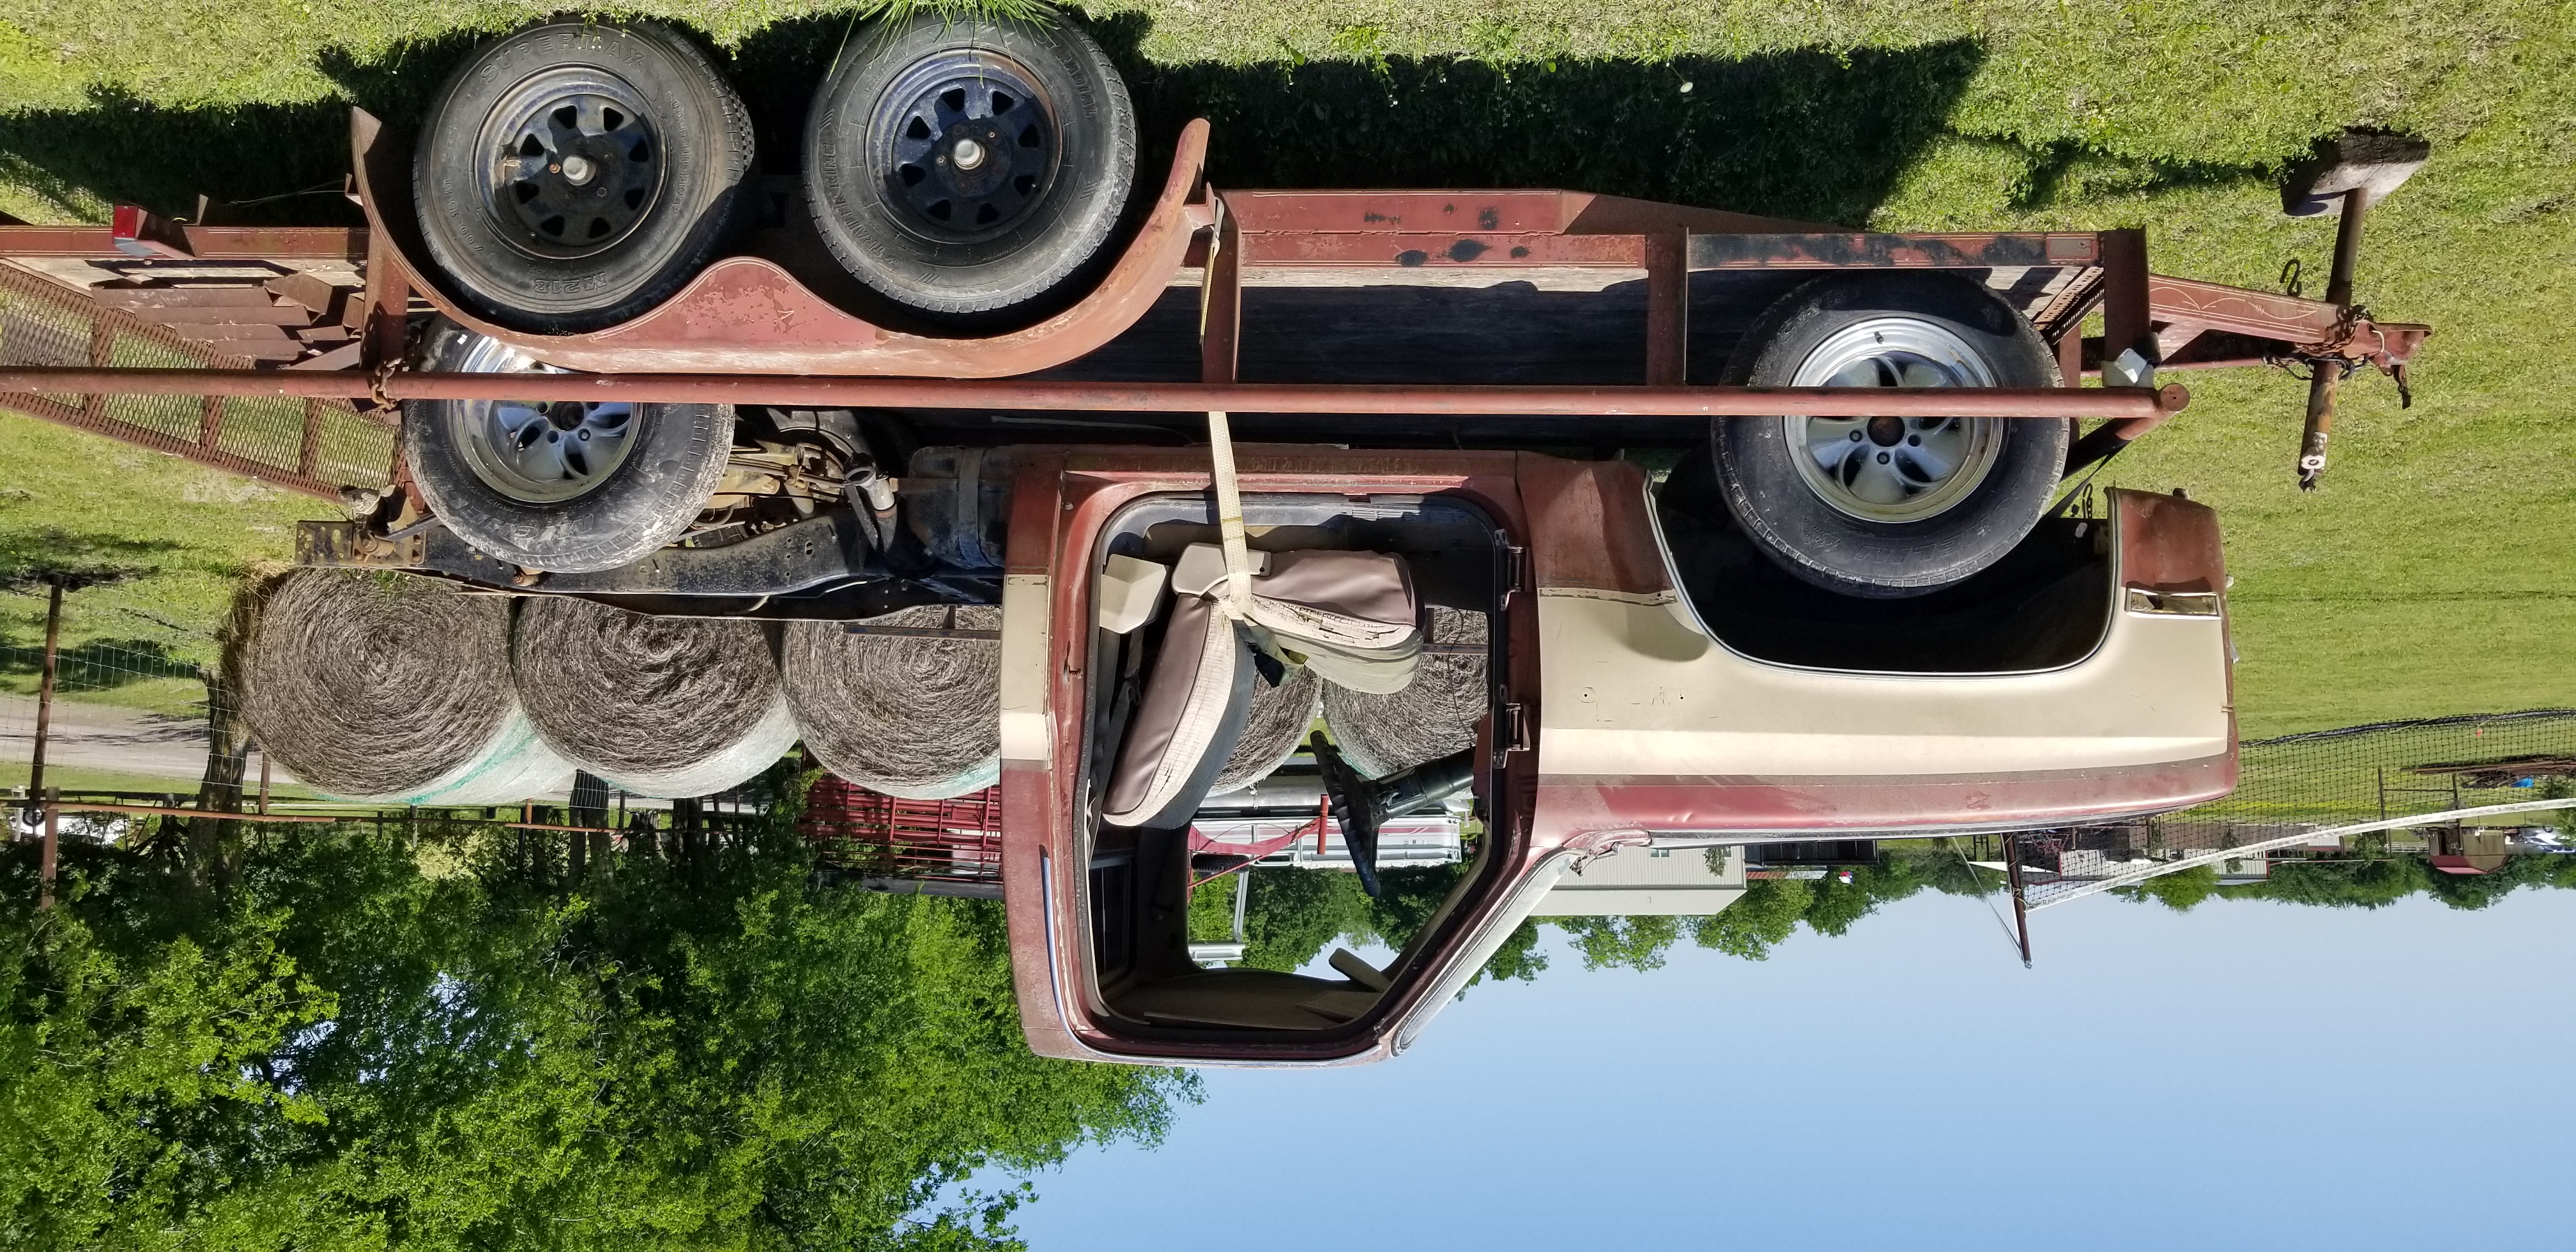 1984 Chevy donor truck